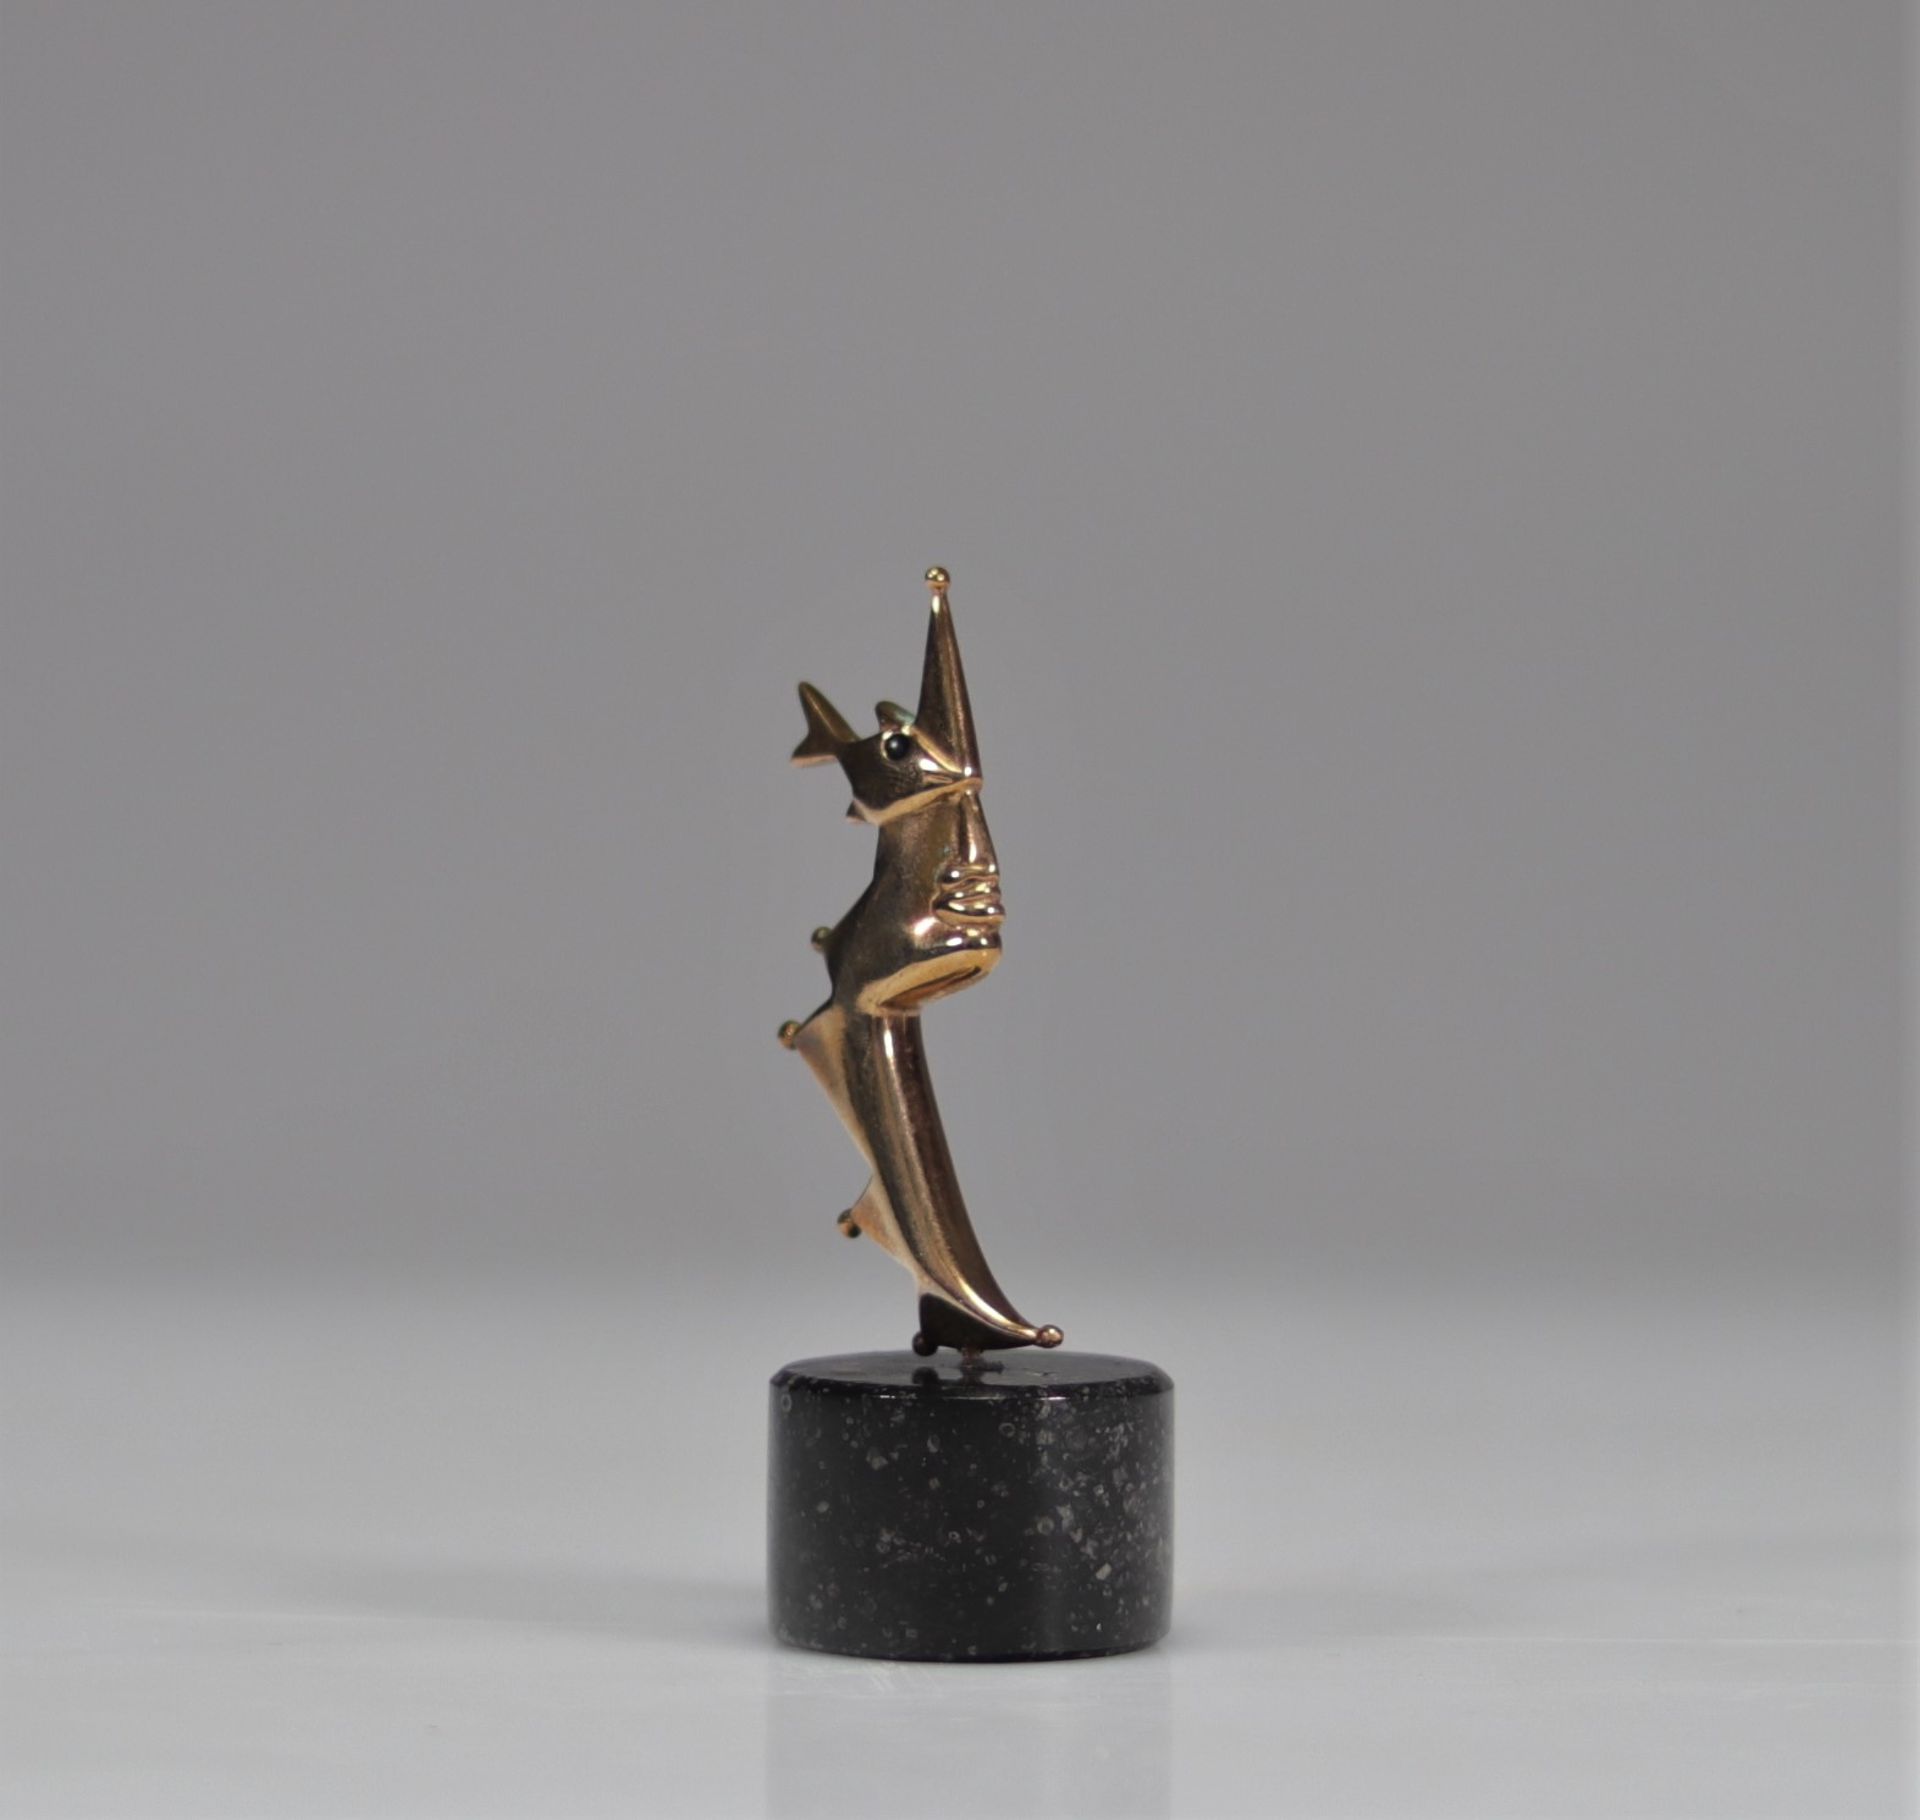 Jean Cocteau. Circa 50. "Fishman". Sculpture in gilded bronze and enamel on a black granite base. - Image 3 of 4